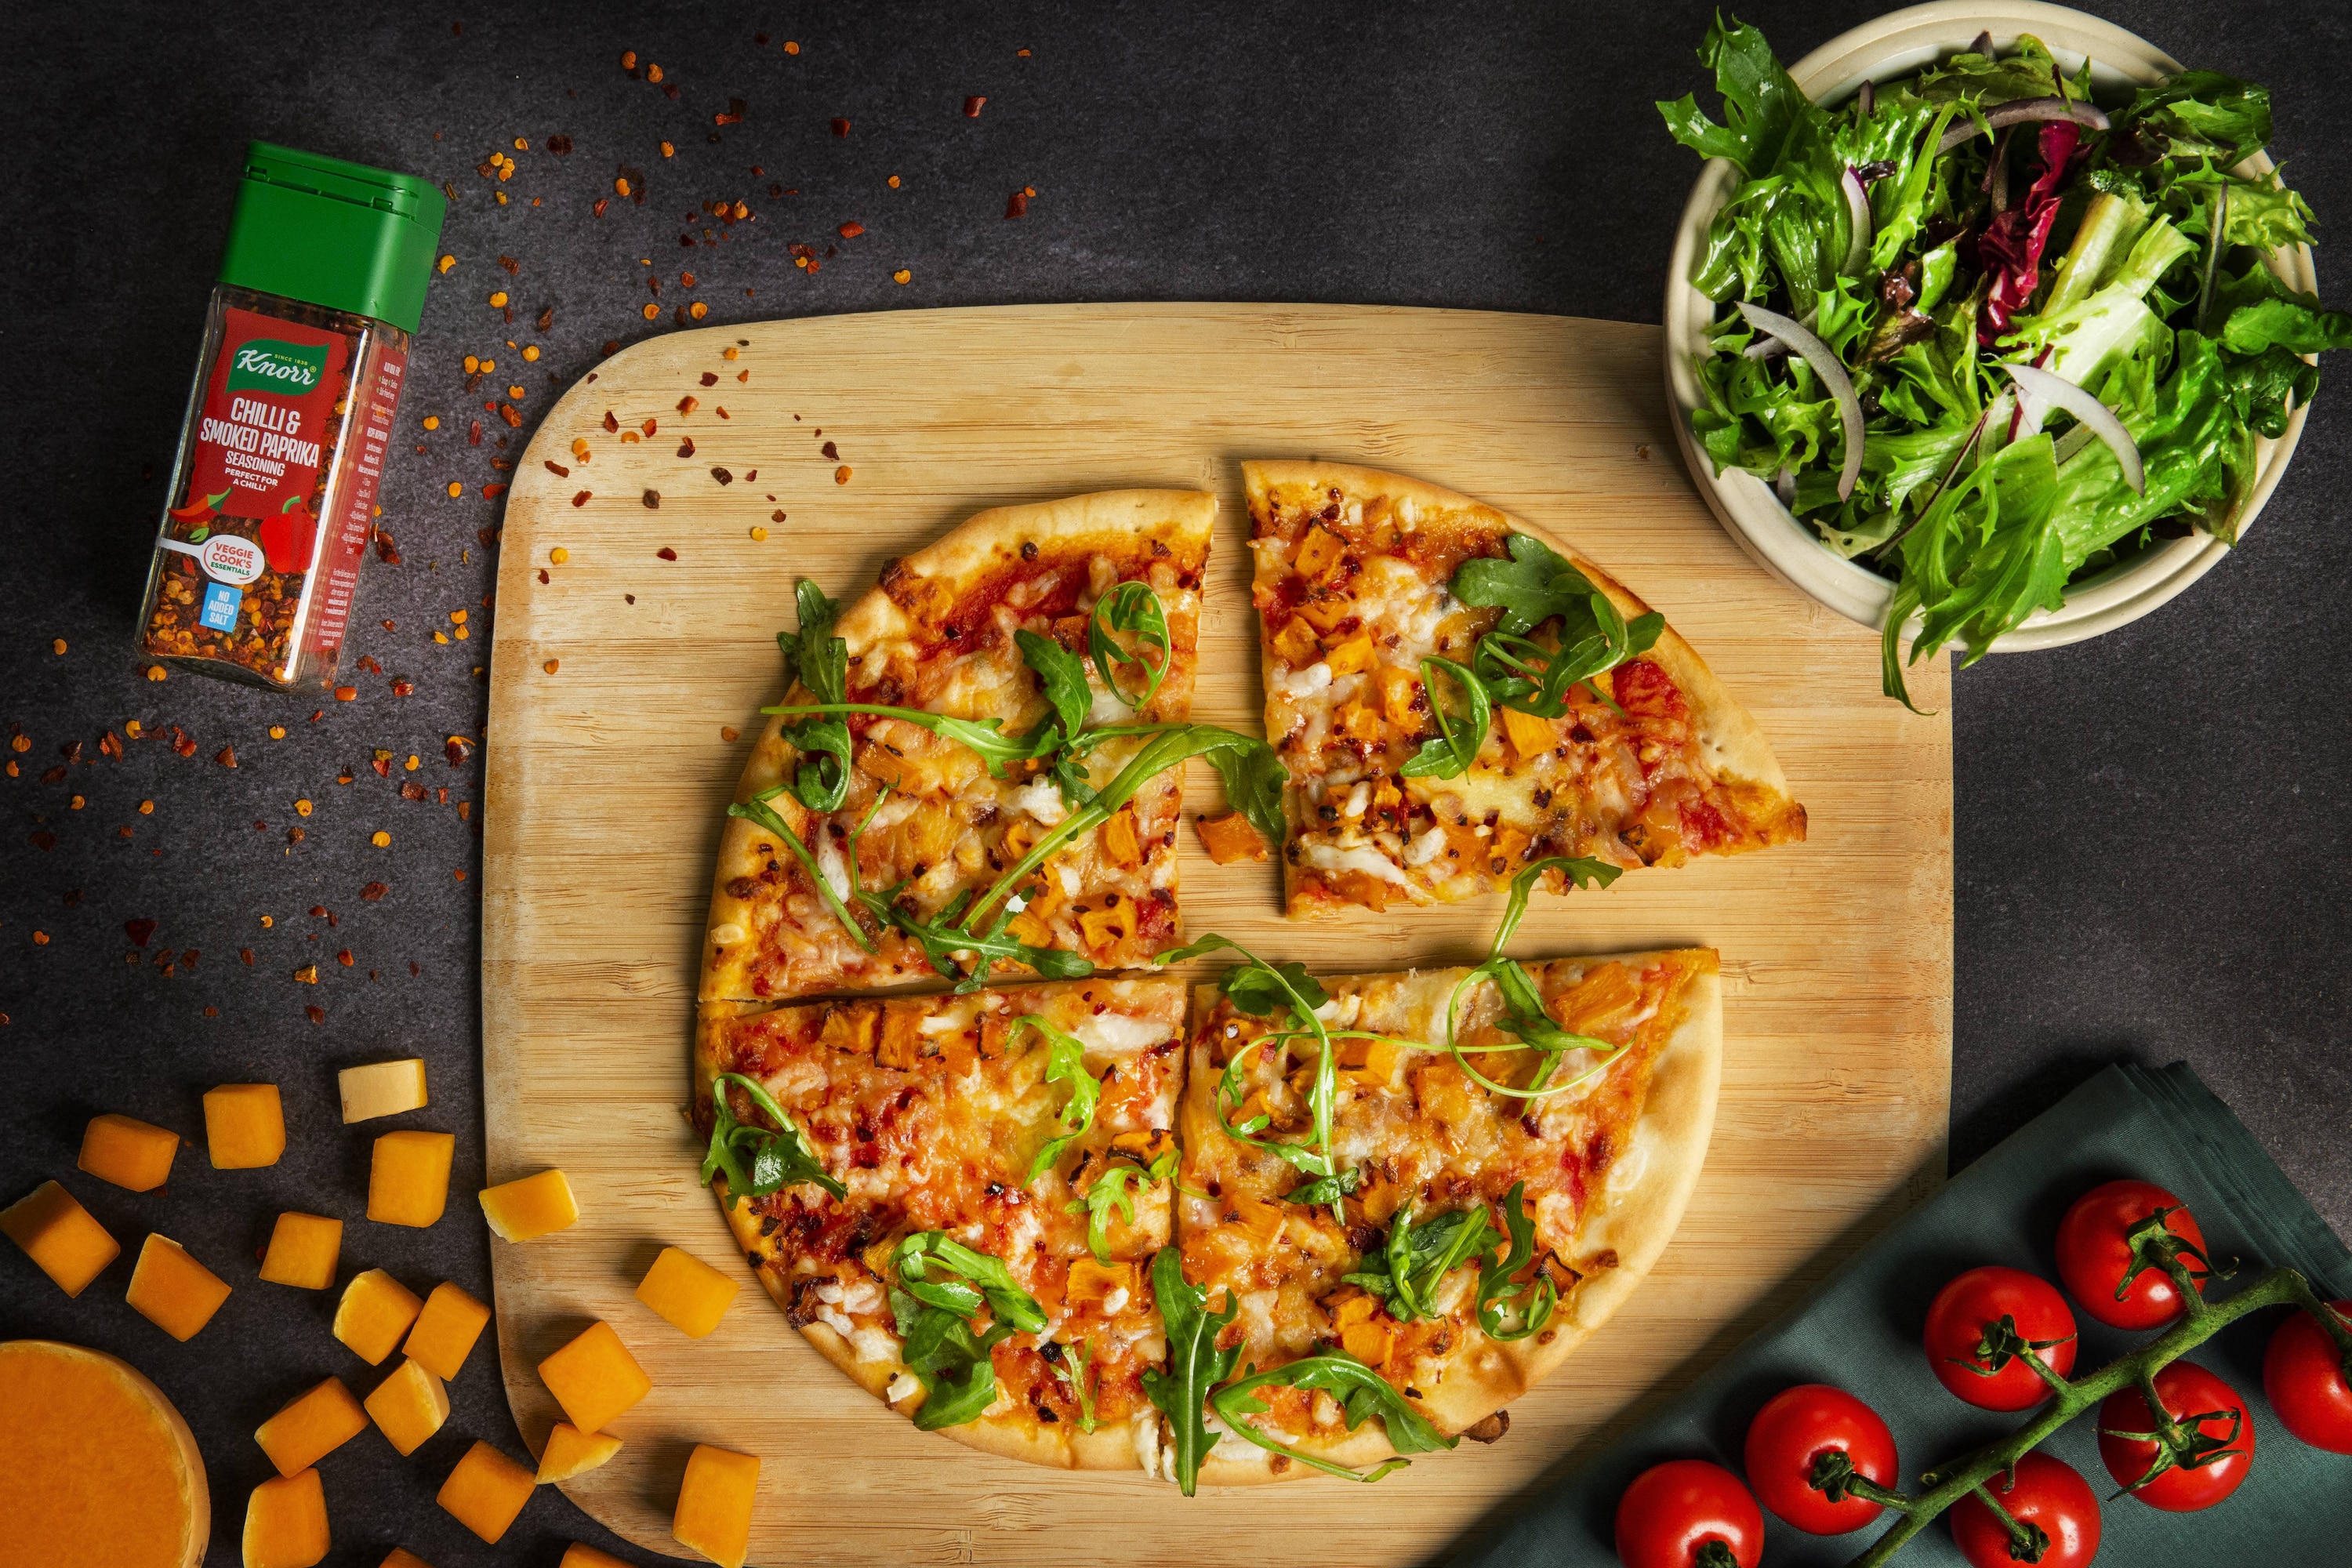 Chilli and Maple Glazed Roasted Pumpkin Pizza